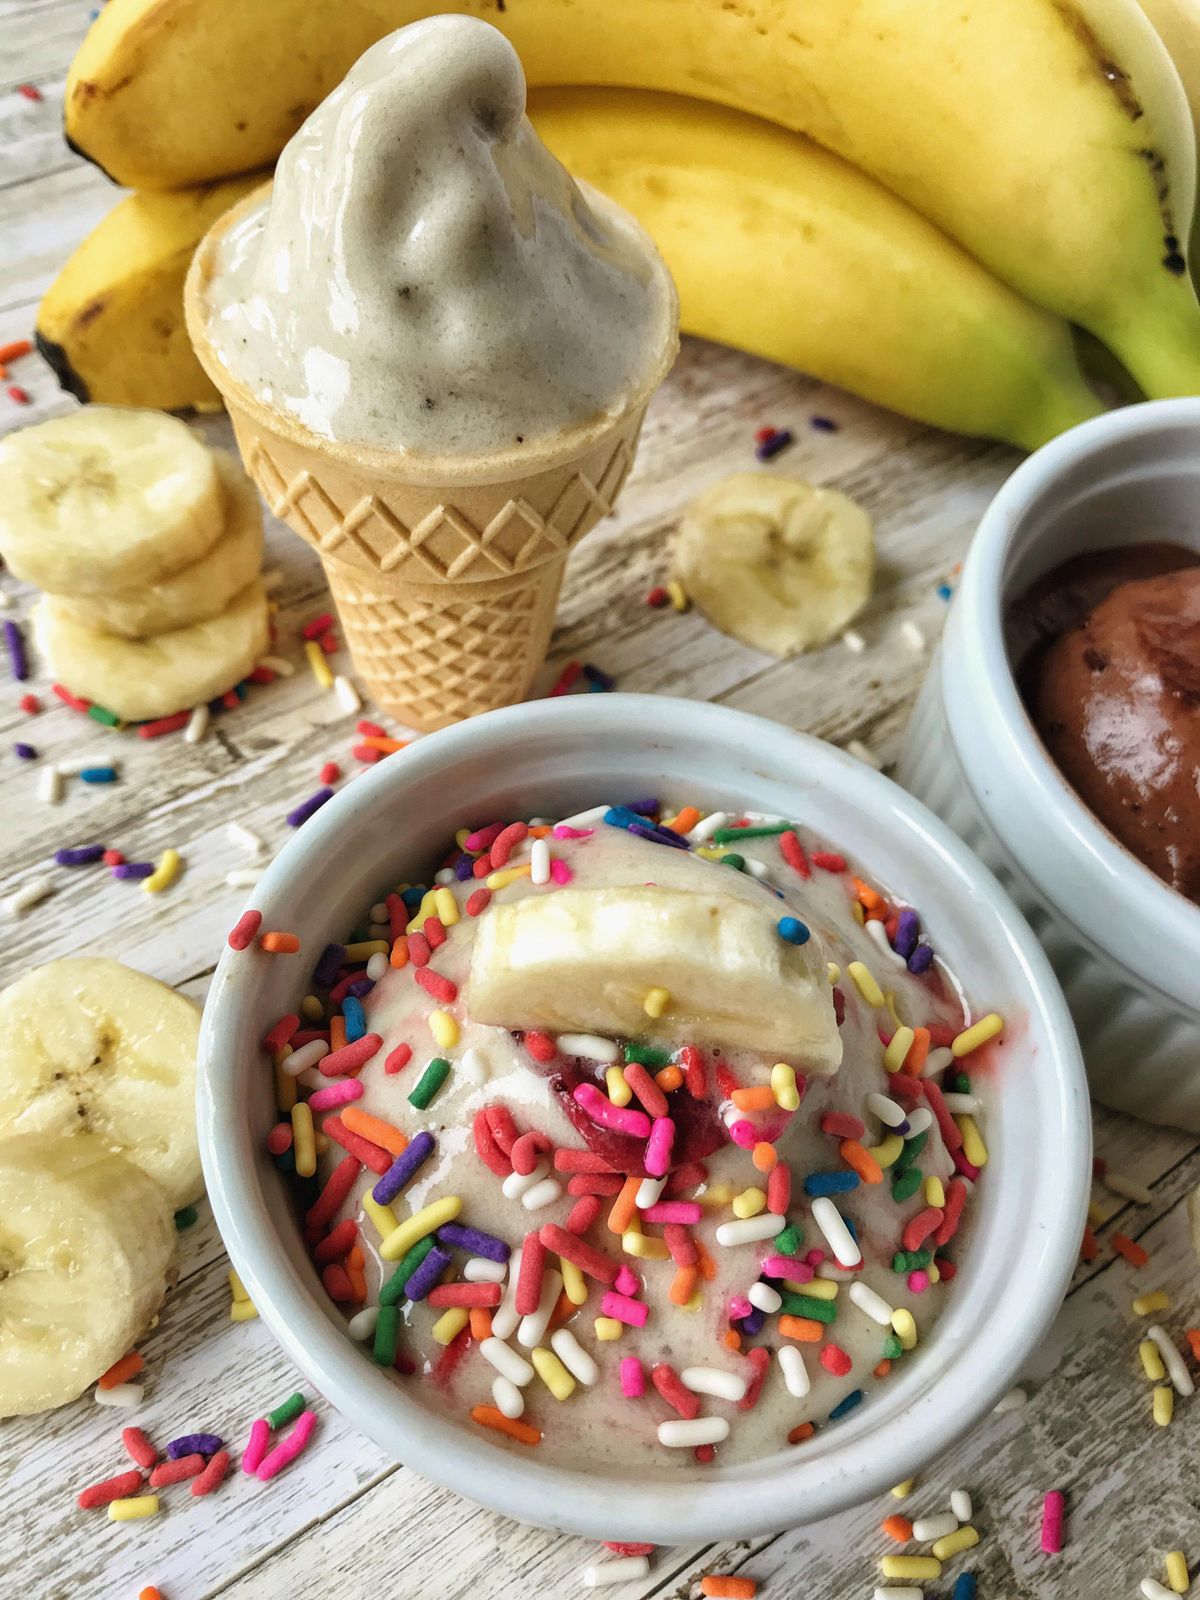 The only ingredient in this banana ice cream is frozen banana. Of course, you can mix in additional ingredients for flavor, if you want. (Audrey Alfaro)